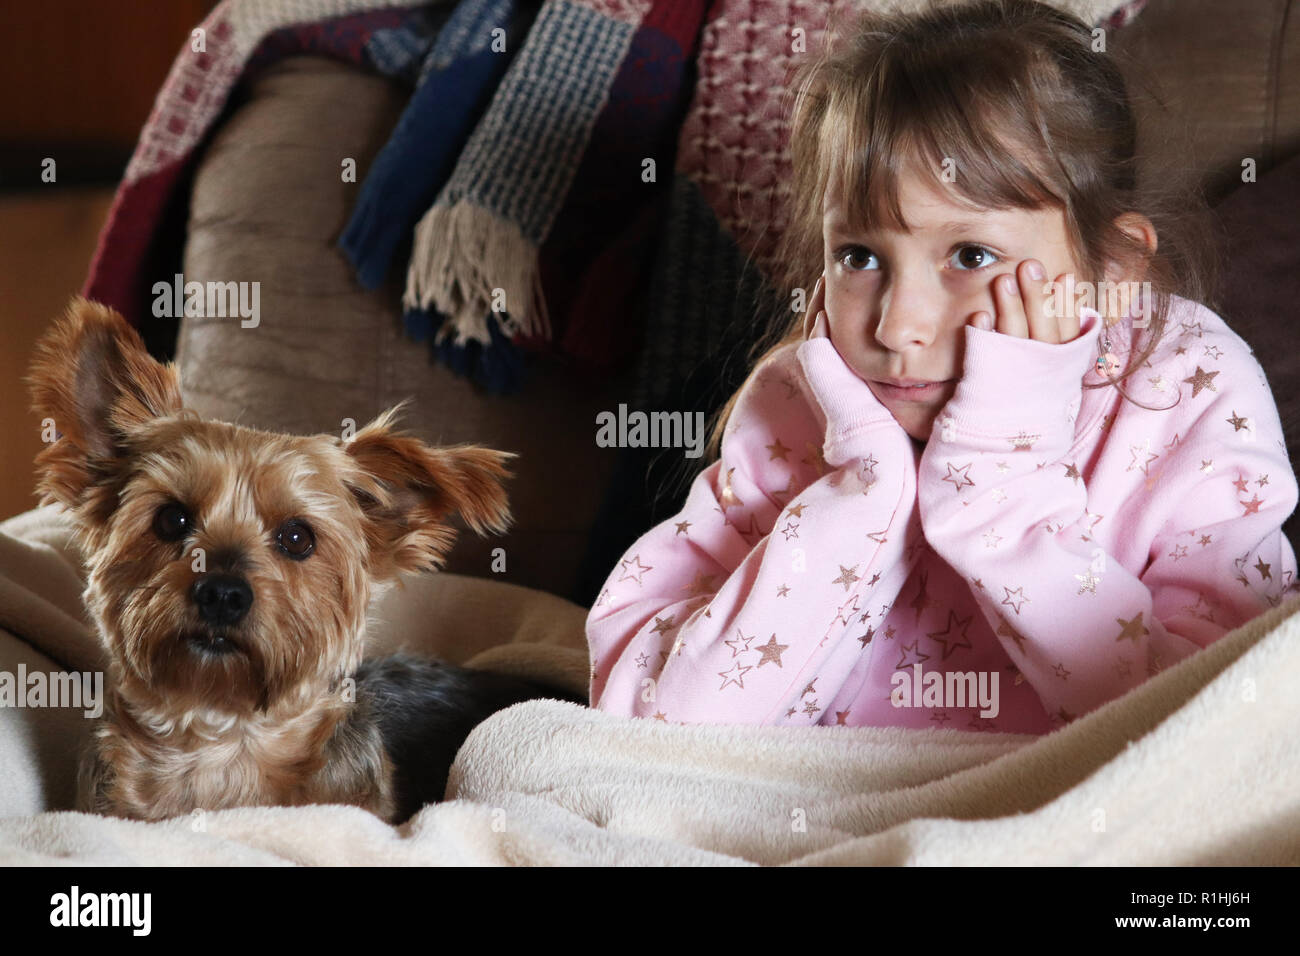 Child sitting in recliner with her best friend Stock Photo